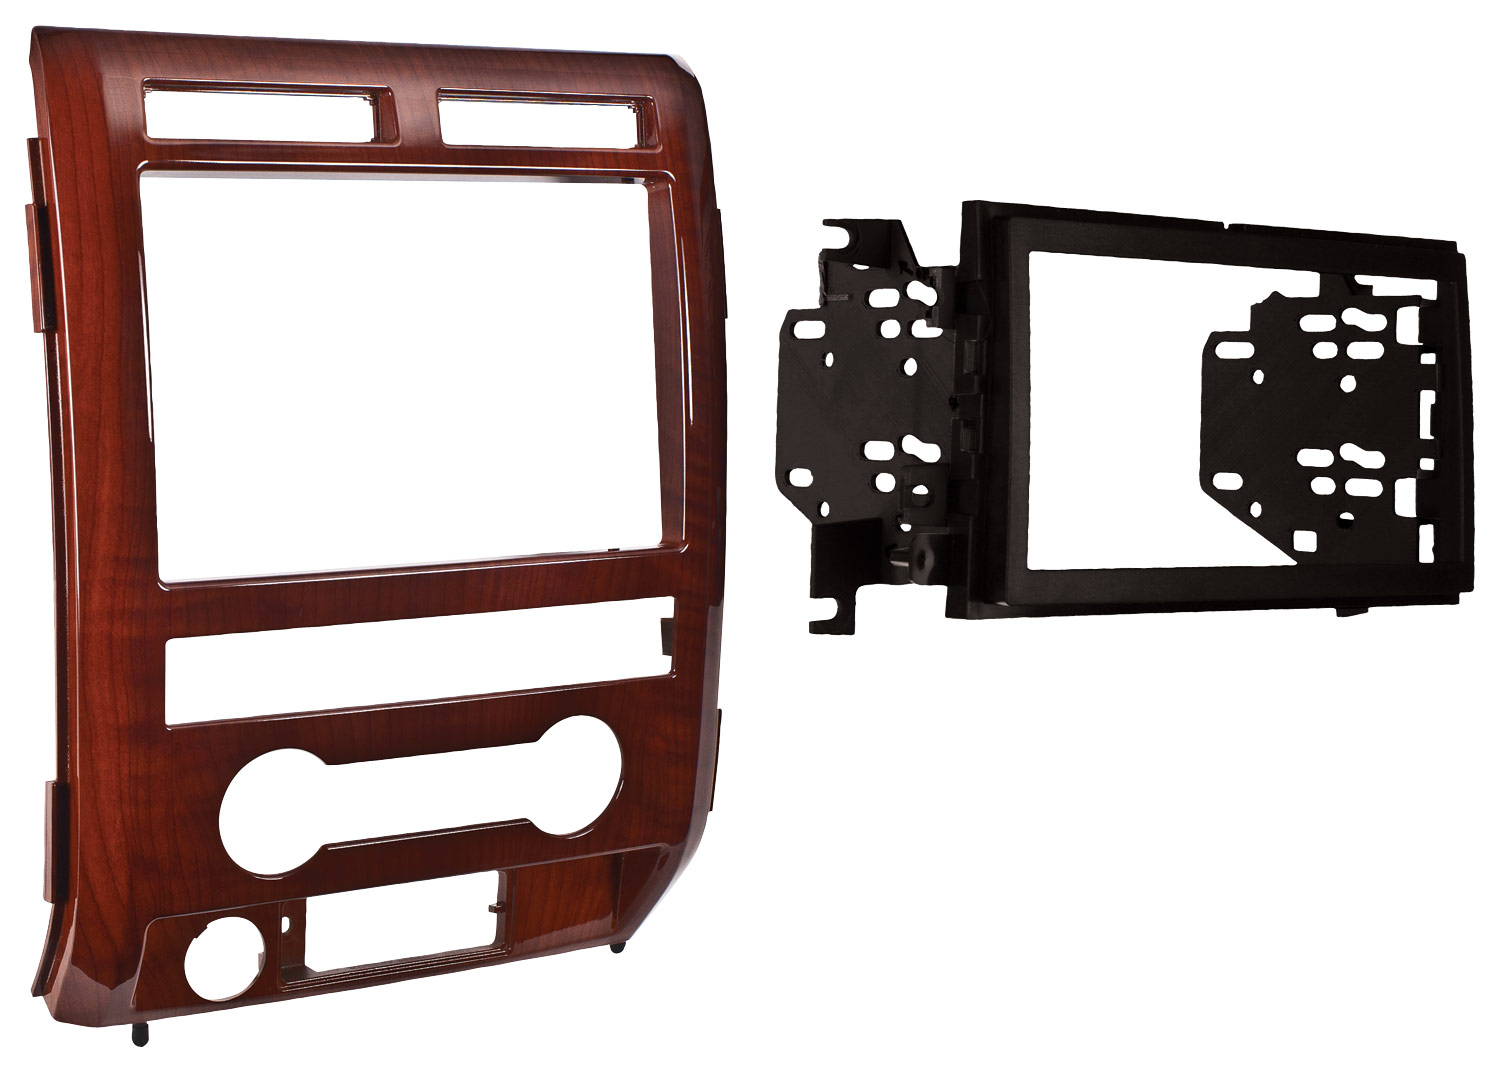 Metra - Installation Kit for Select 2009-2010 Ford F-150 Lariat Vehicles - Milano Maple was $119.99 now $89.99 (25.0% off)